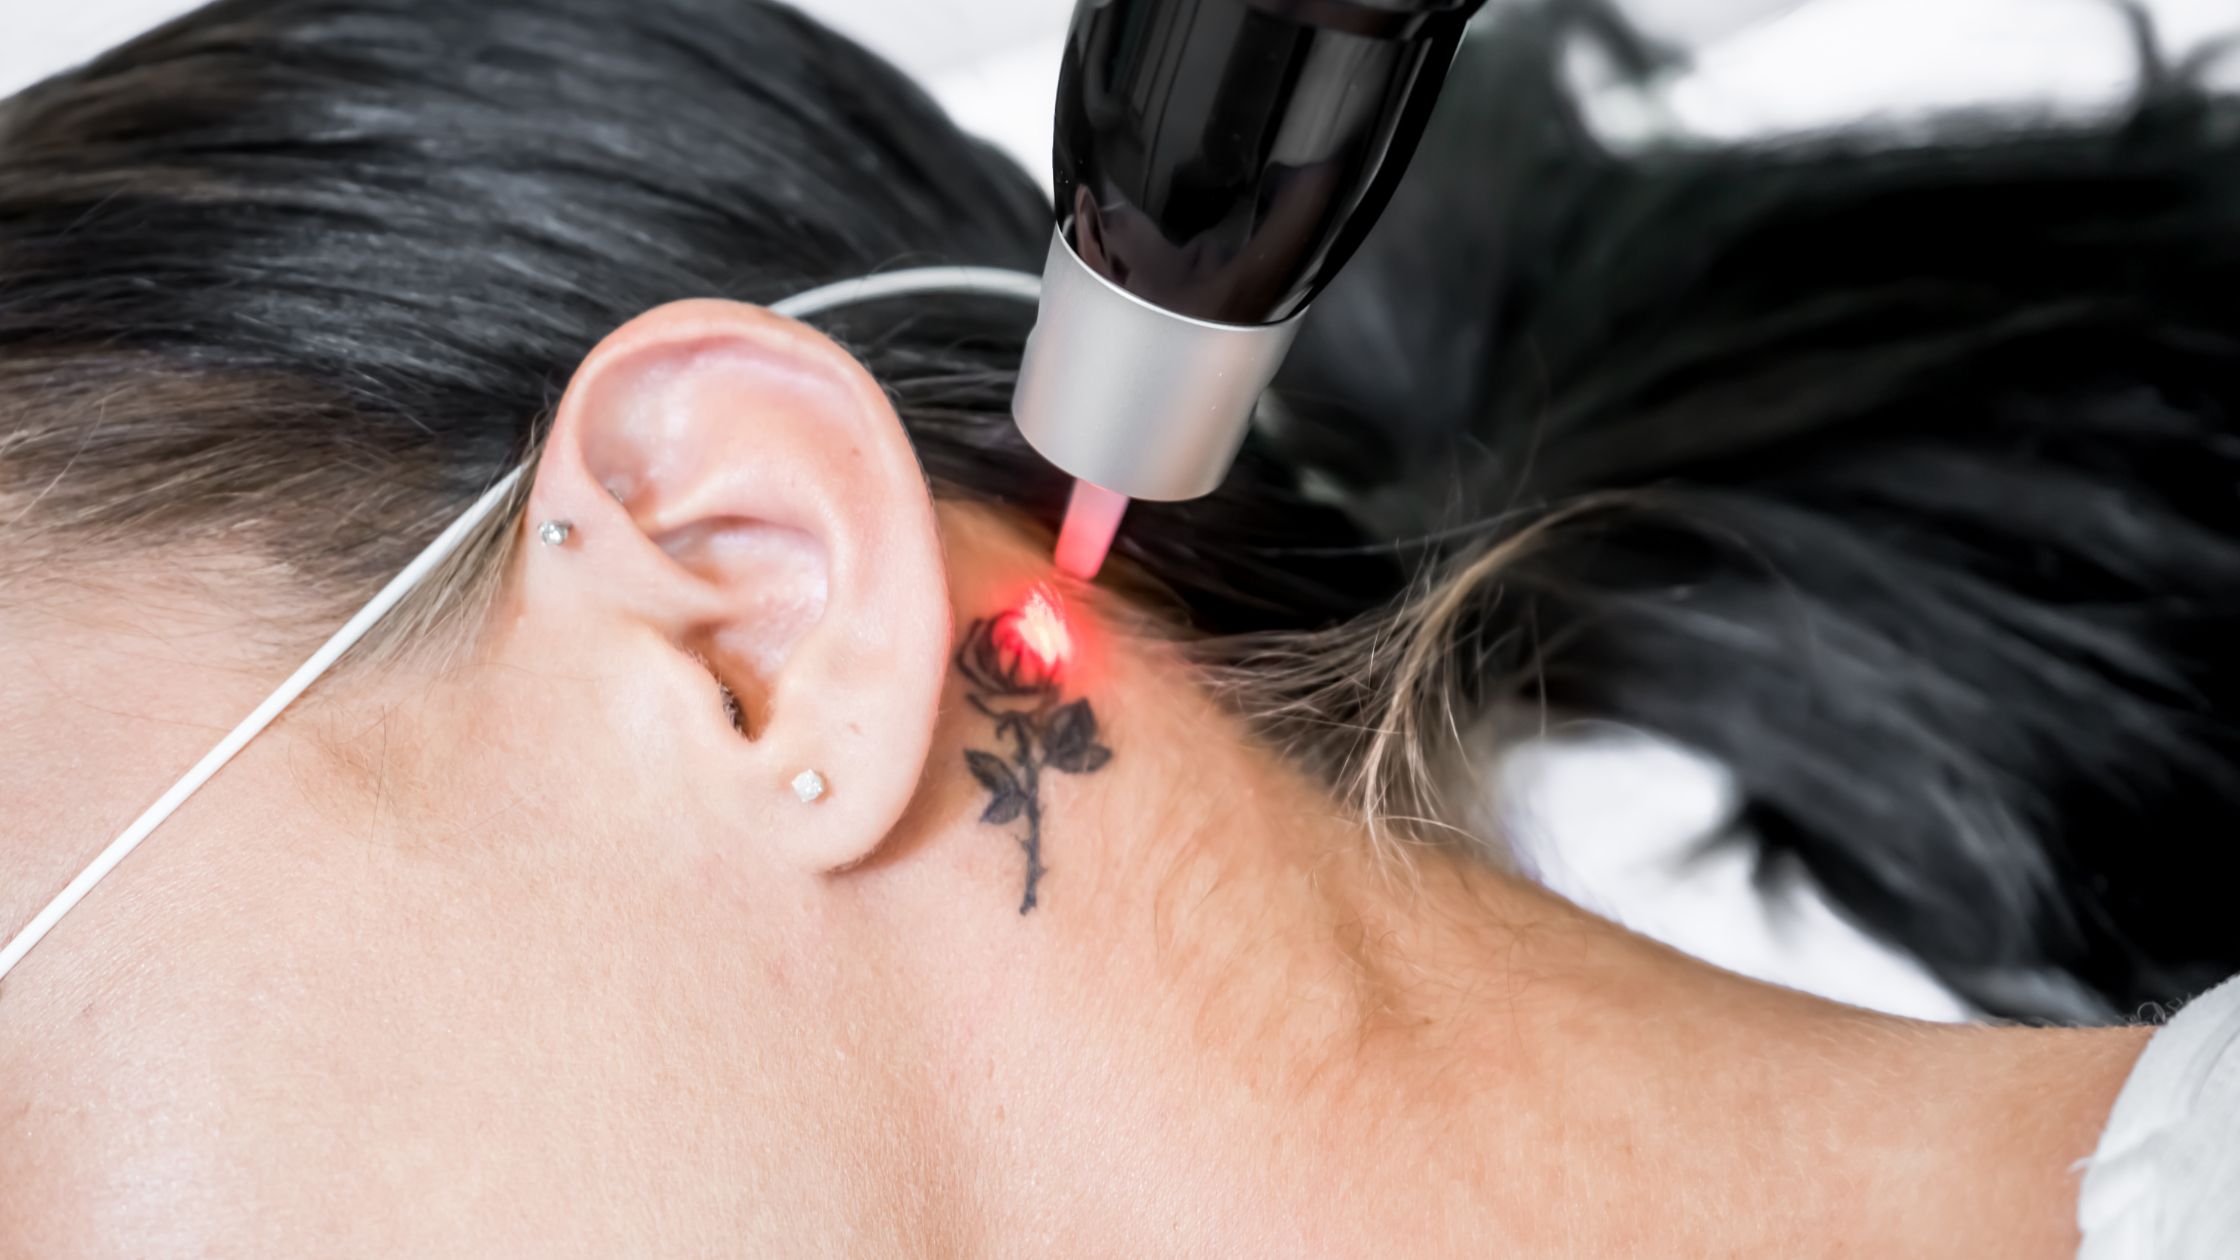 Tattoo Removal Service in Redding CA | SMWC